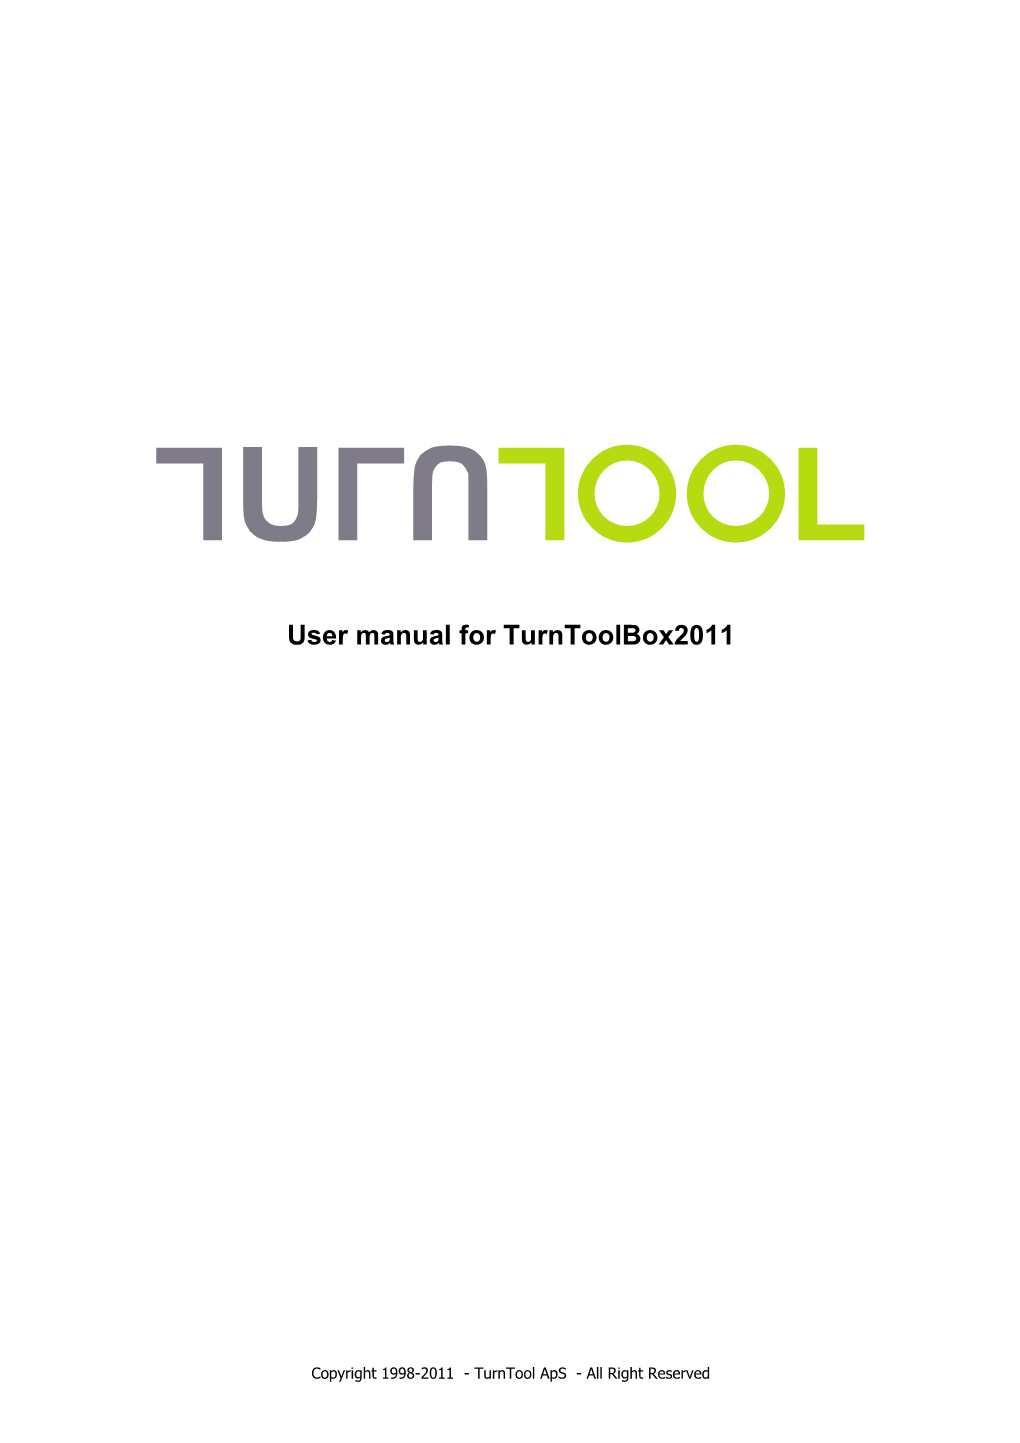 User Manual for Turntoolbox2011